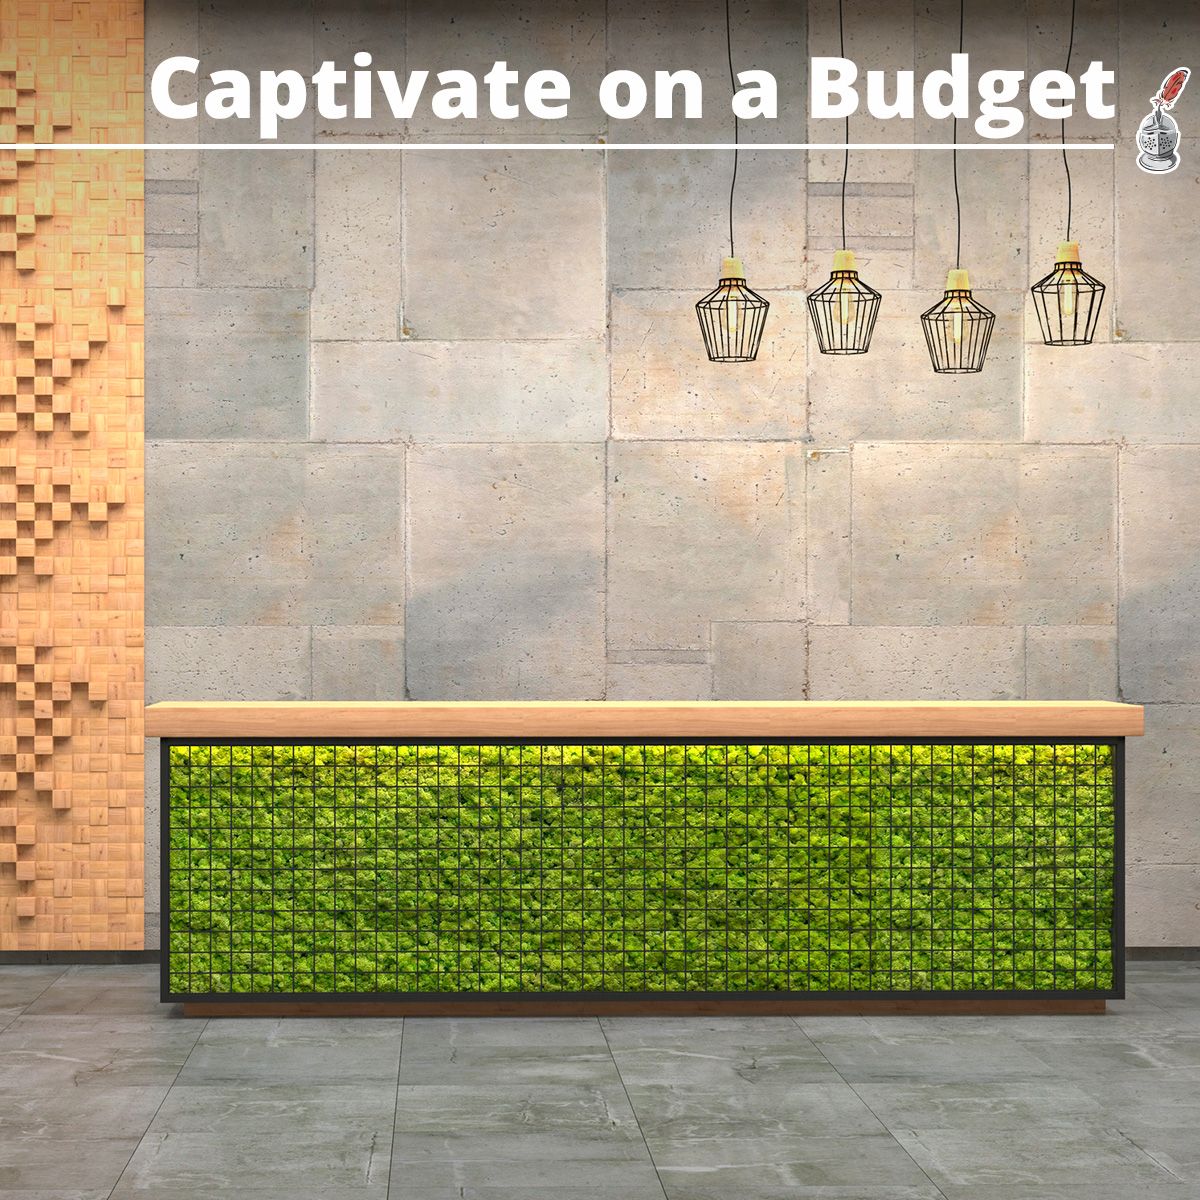 Captivate on a Budget